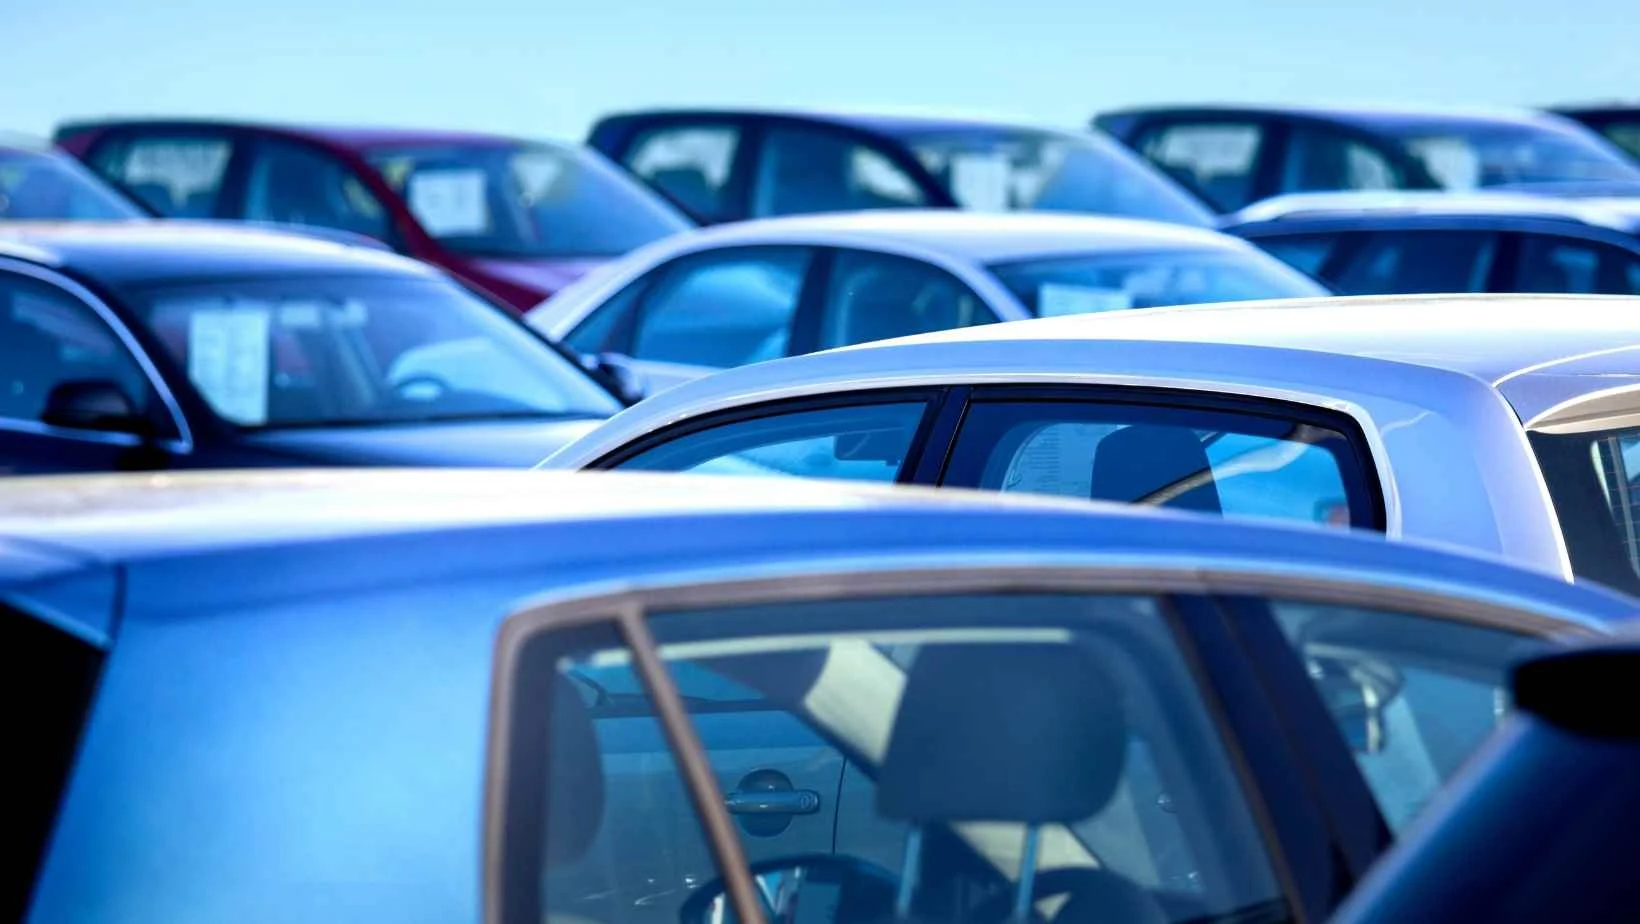 Canva pro stock image of lots of cars illustrating choosing a safe family car